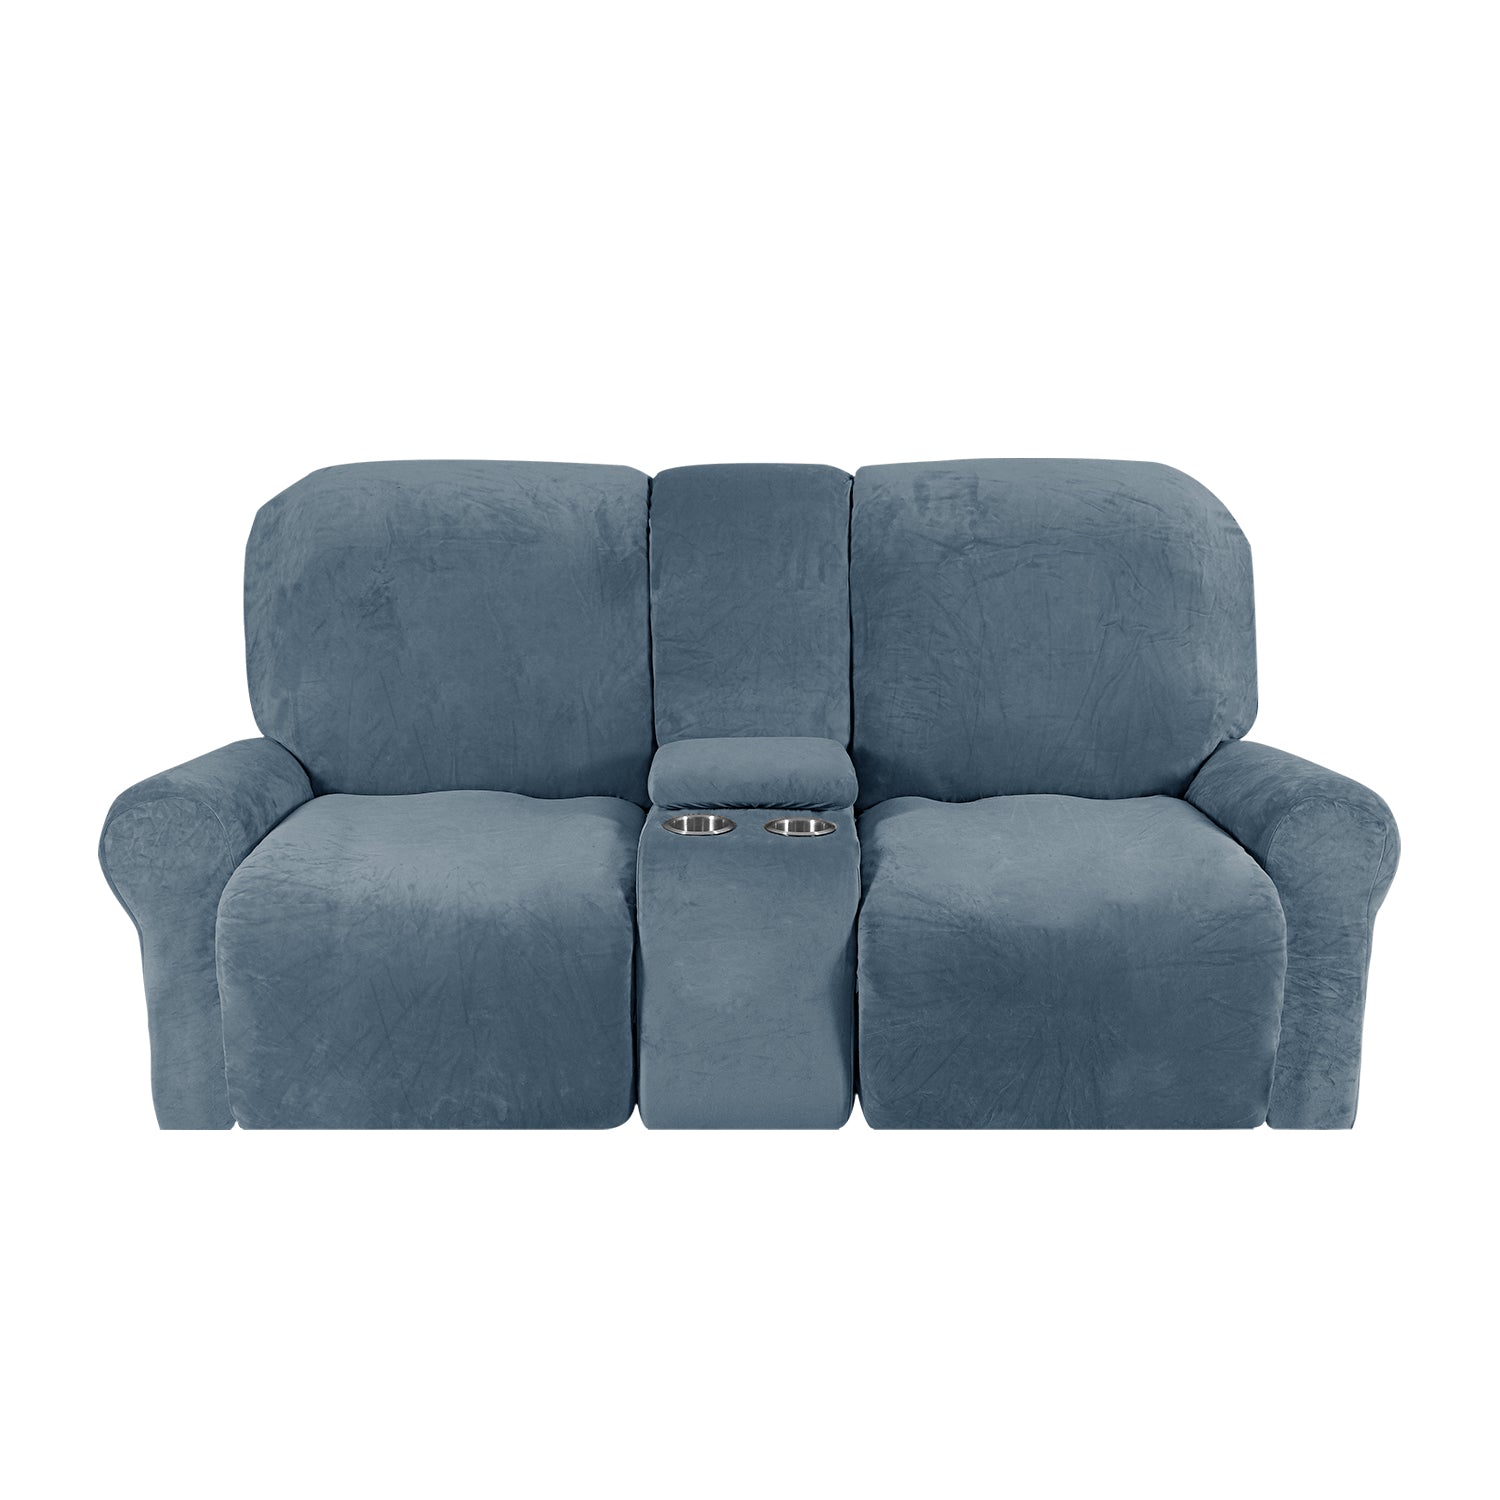 Love-seat Recliner Cover-with Cup Holders-2 Seats-Velvet-Gray blue